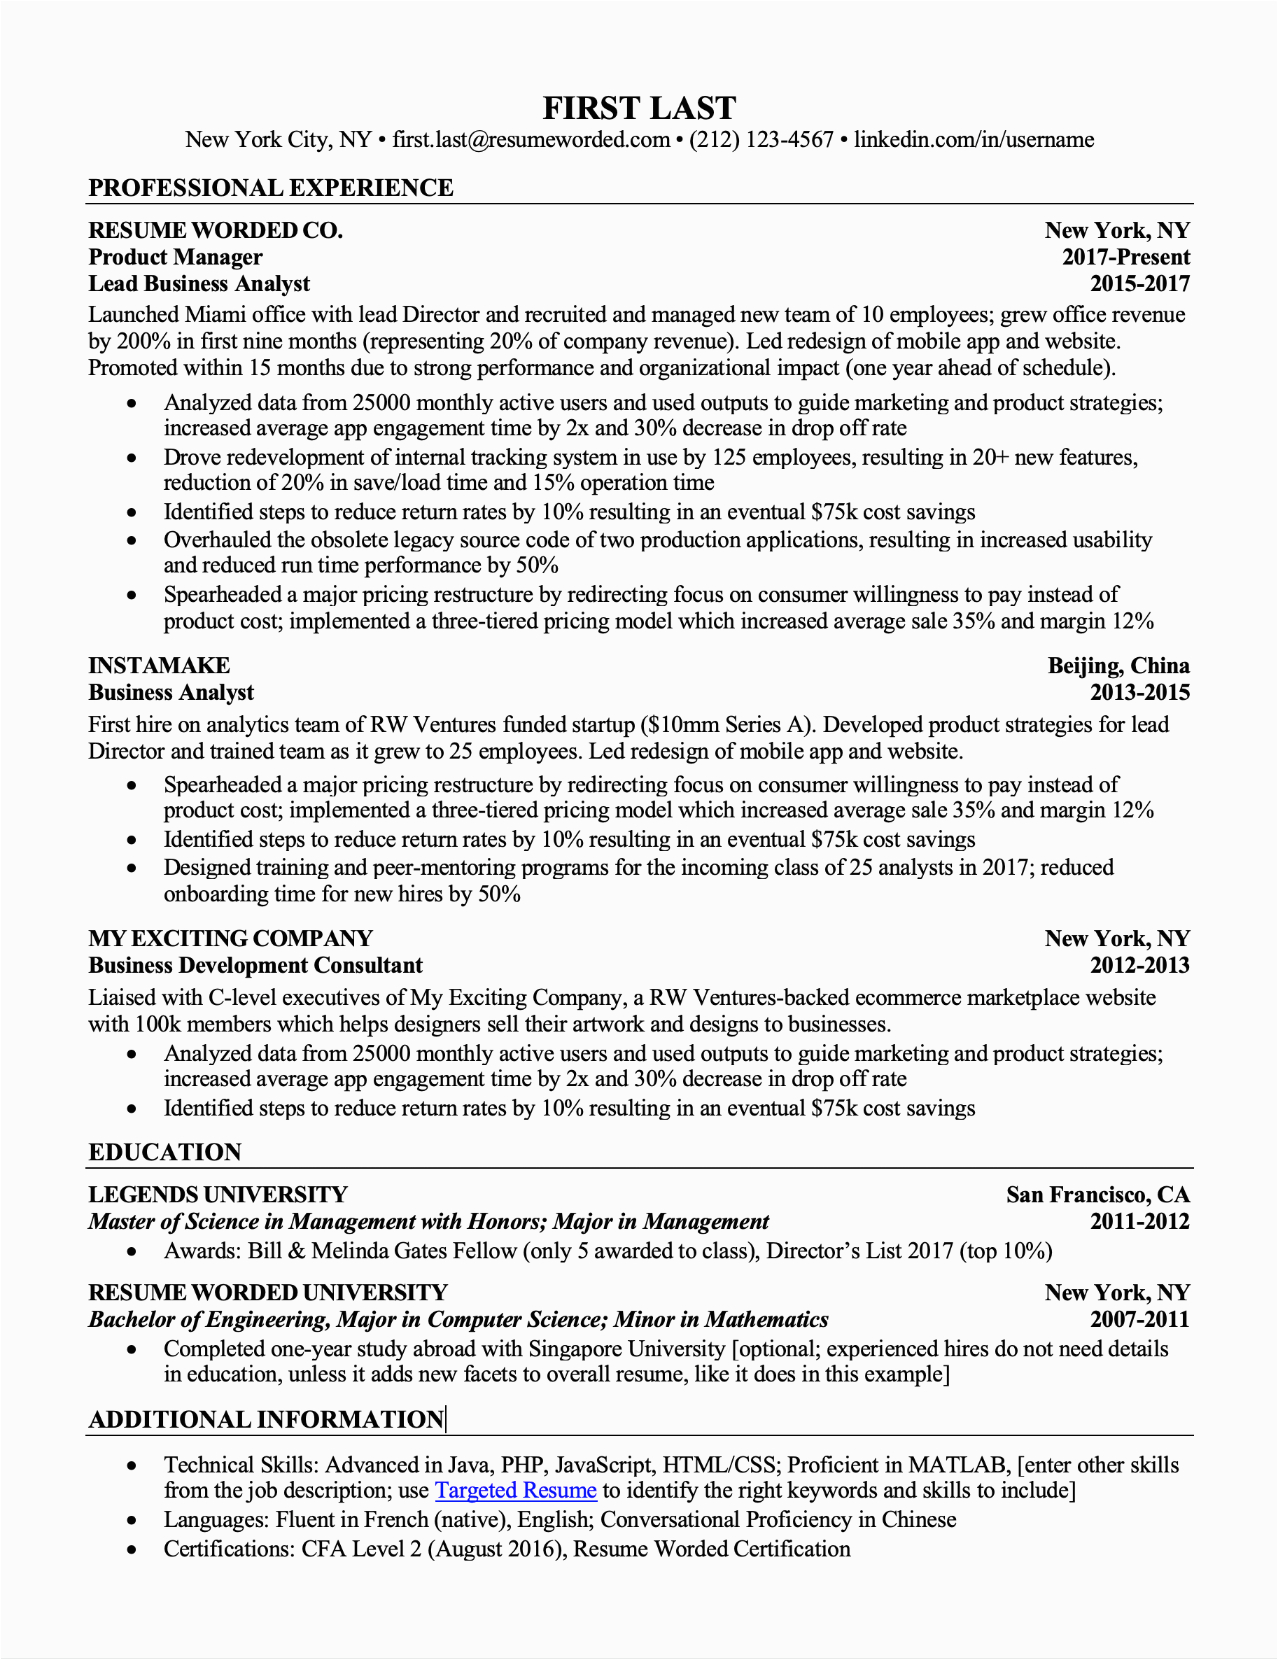 Resume Template for A Lot Of Experience Work Experience Resume format for Experienced the 2